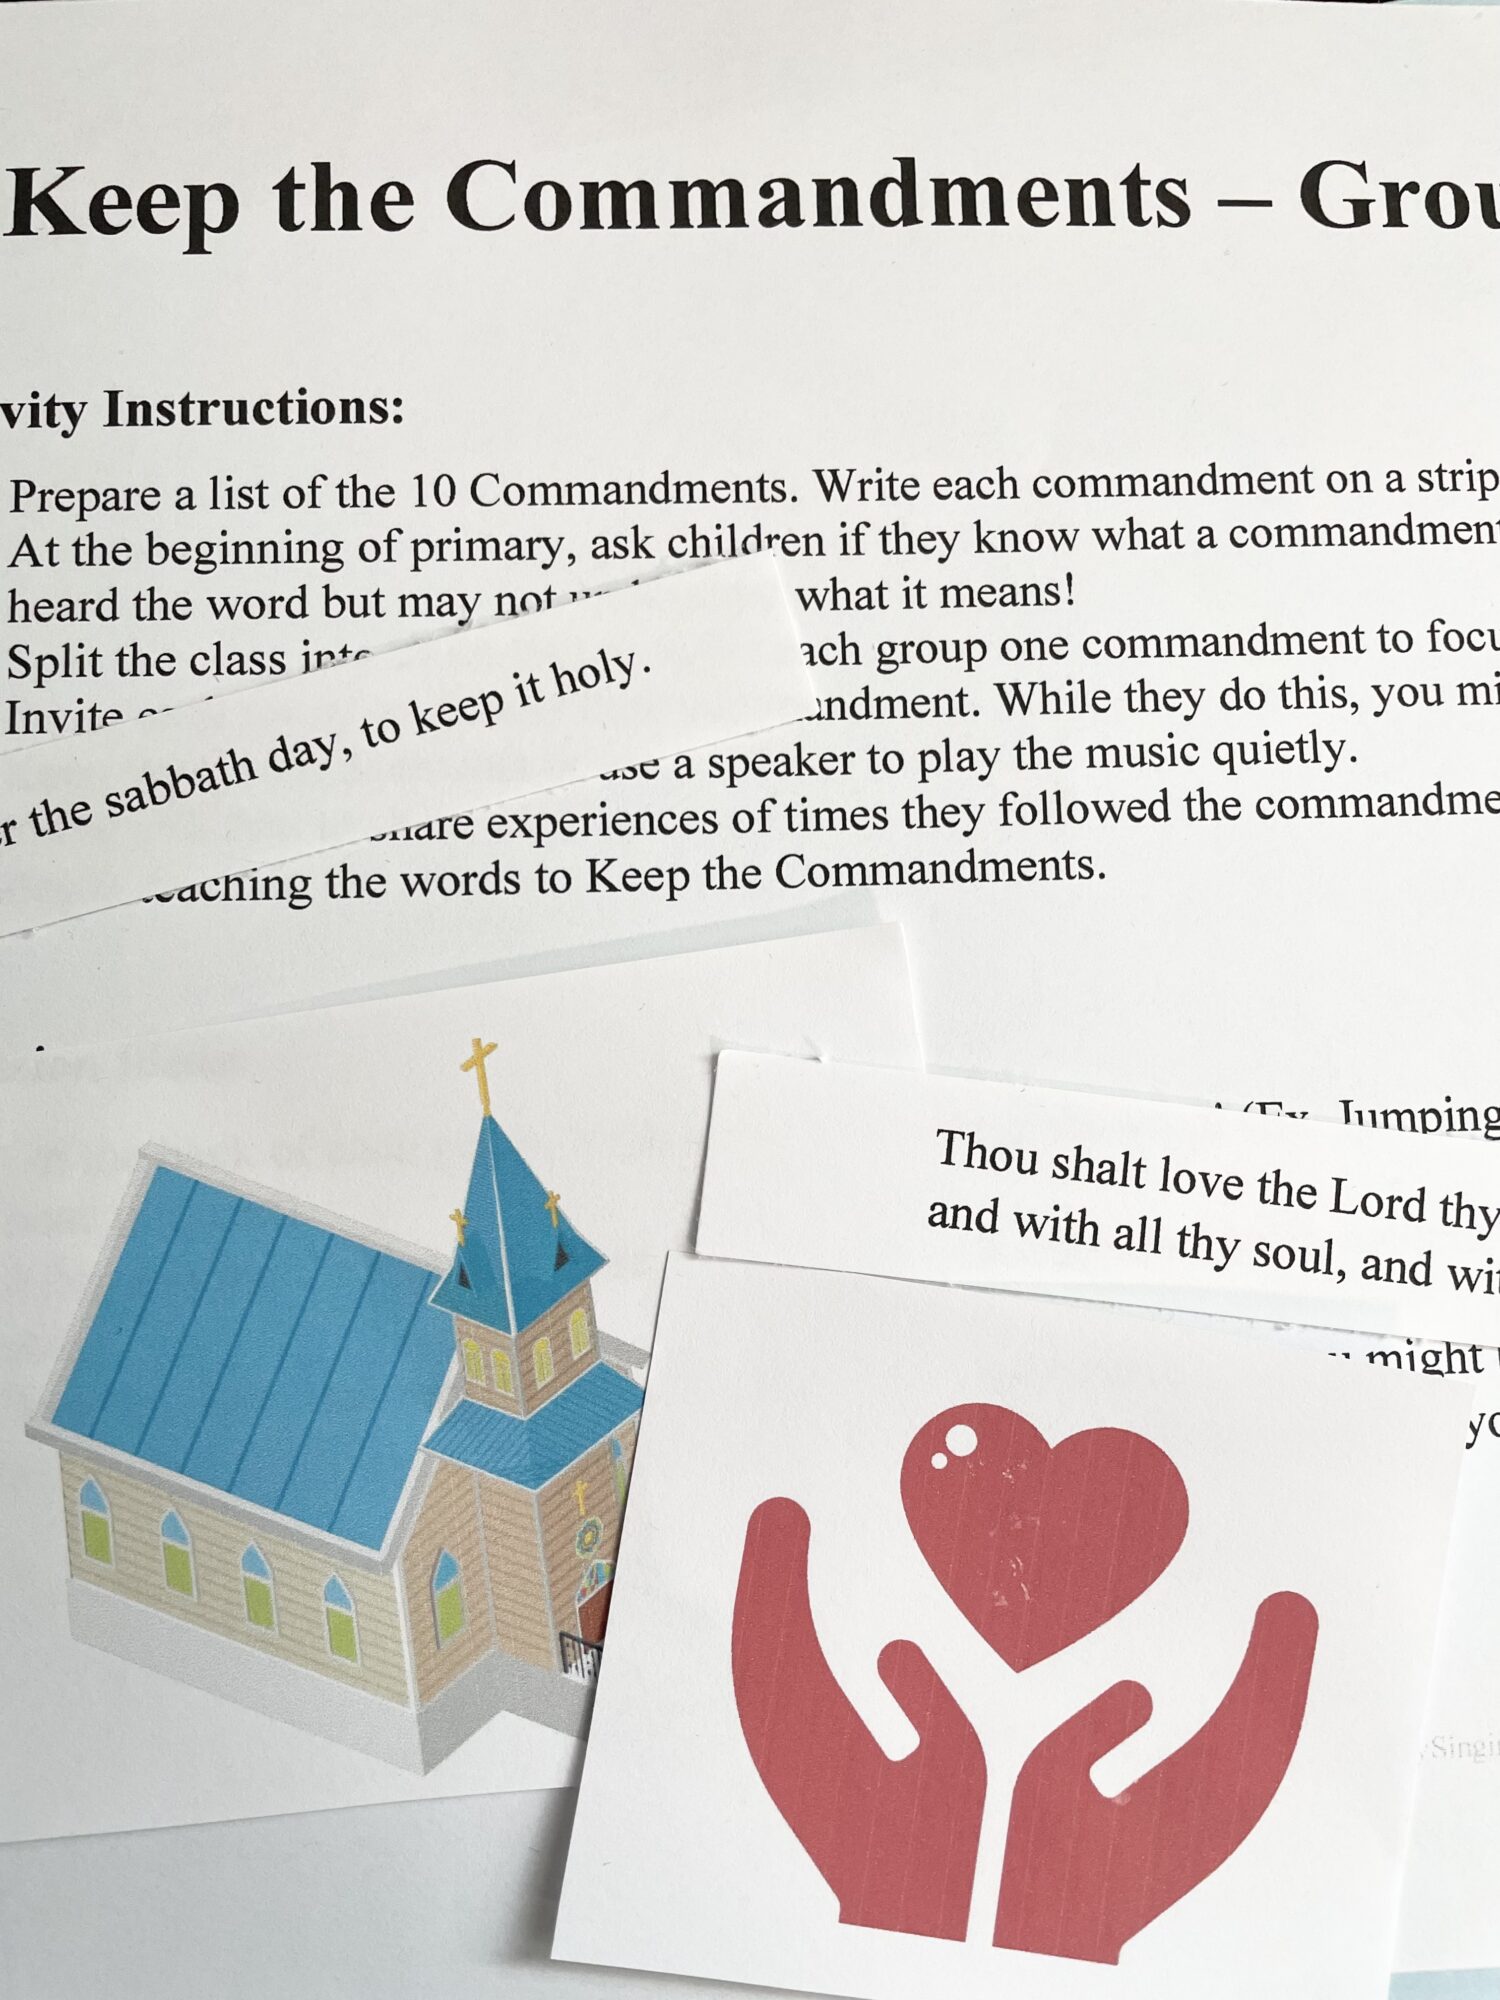 Keep the Commandments - Group Stories Activity Easy ideas for Music Leaders IMG 6201